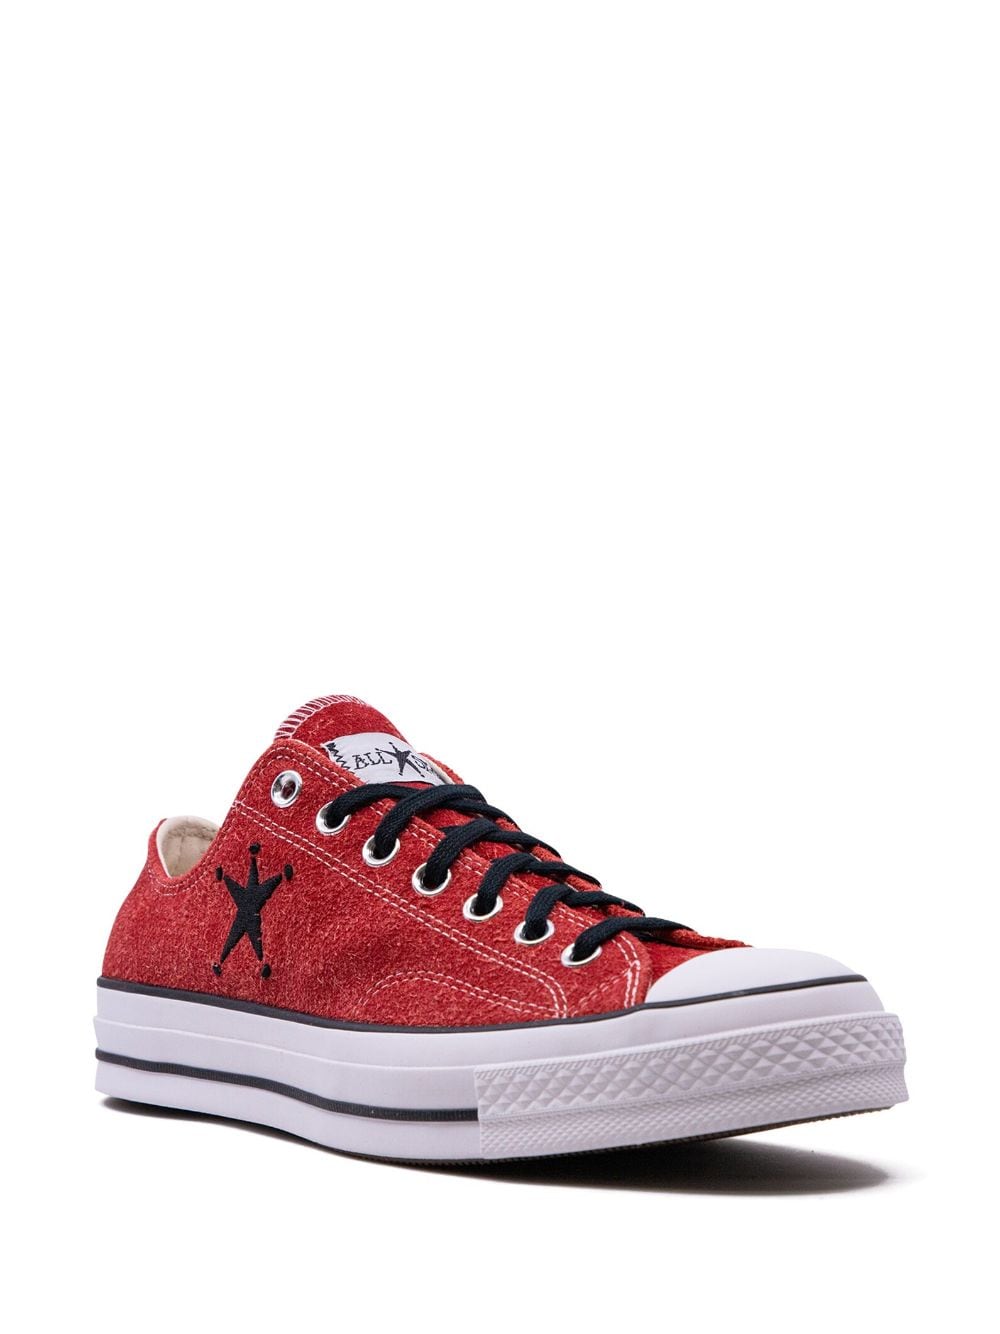 Converse x Stussy Chuck 70 "Poppy Red" sneakers - Rood